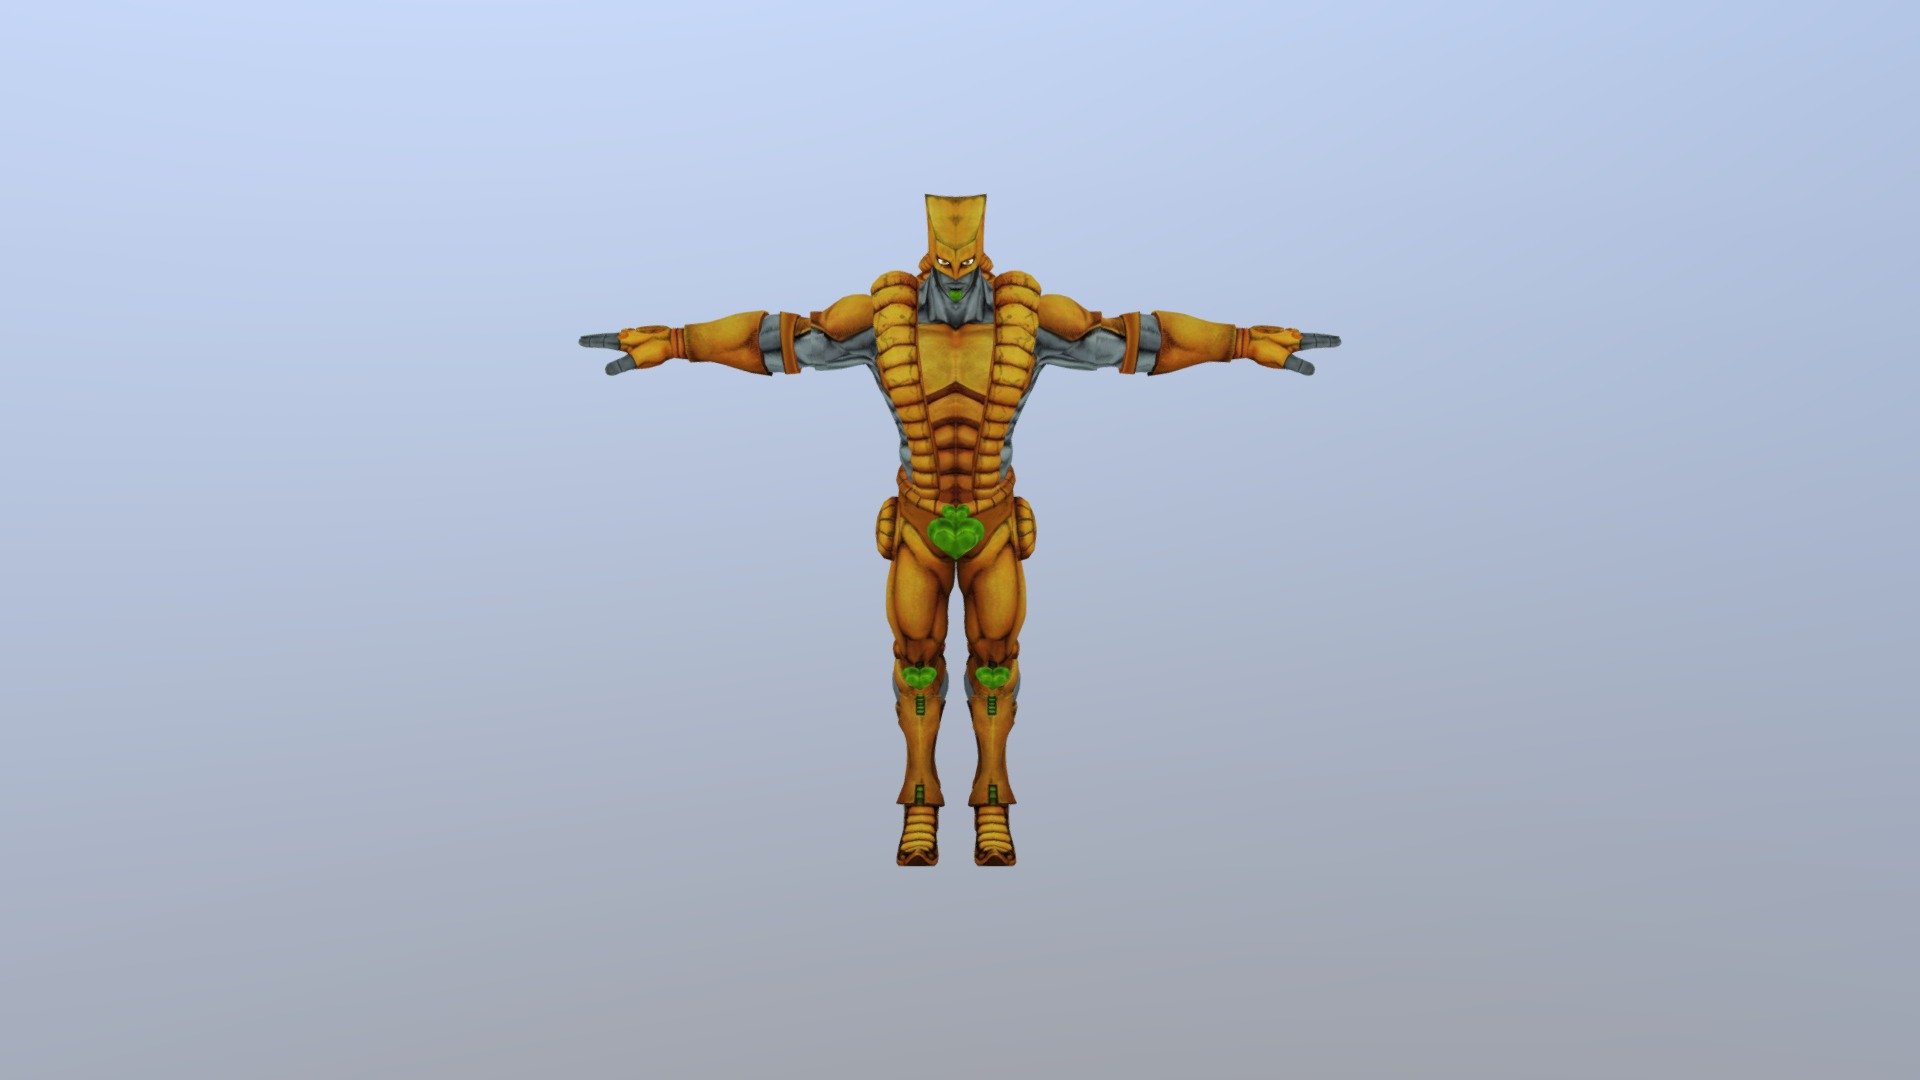 The World Stand Download Free 3d Model By Adamryandavis007 Adamryandavis007 C7f1b44 - dio the world roblox id